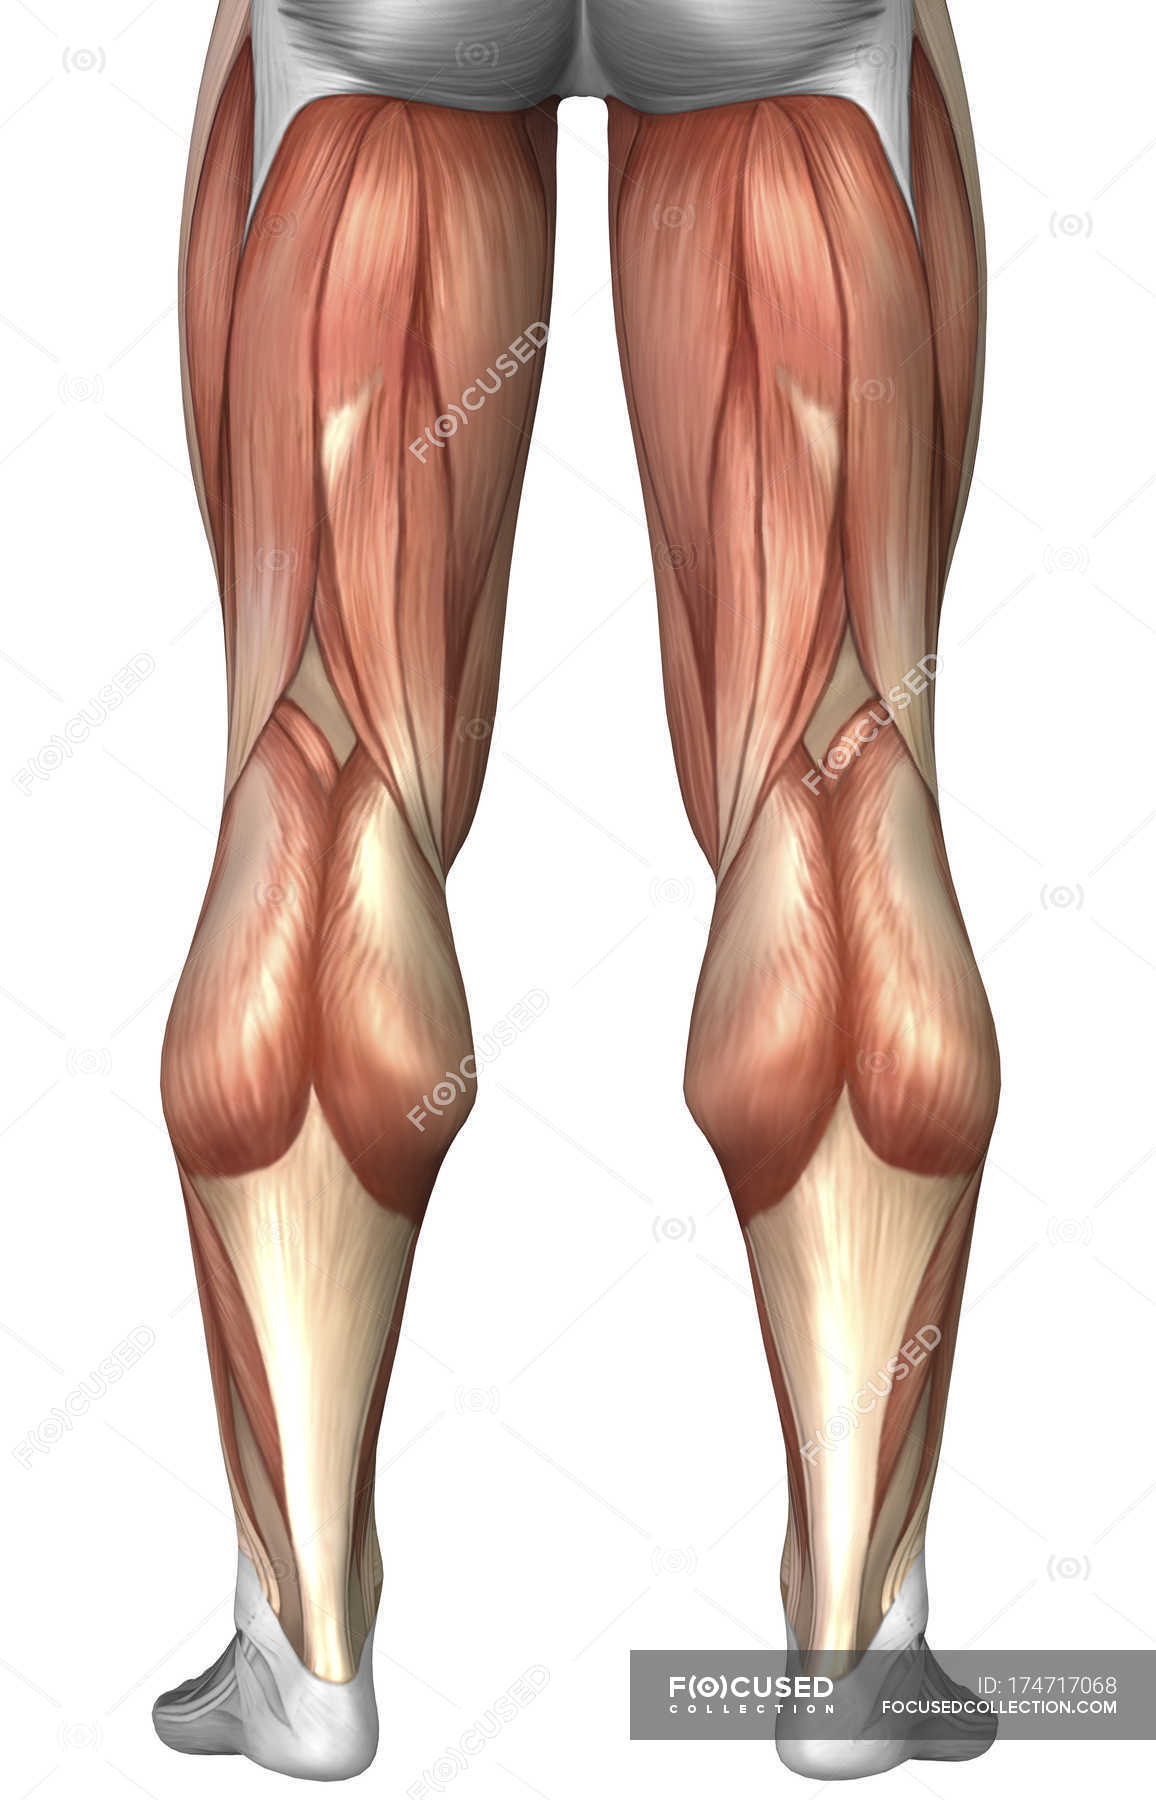 Leg Muscle Diagram Diagram Illustrating Muscle Groups On Back Of Human Legs Rear View